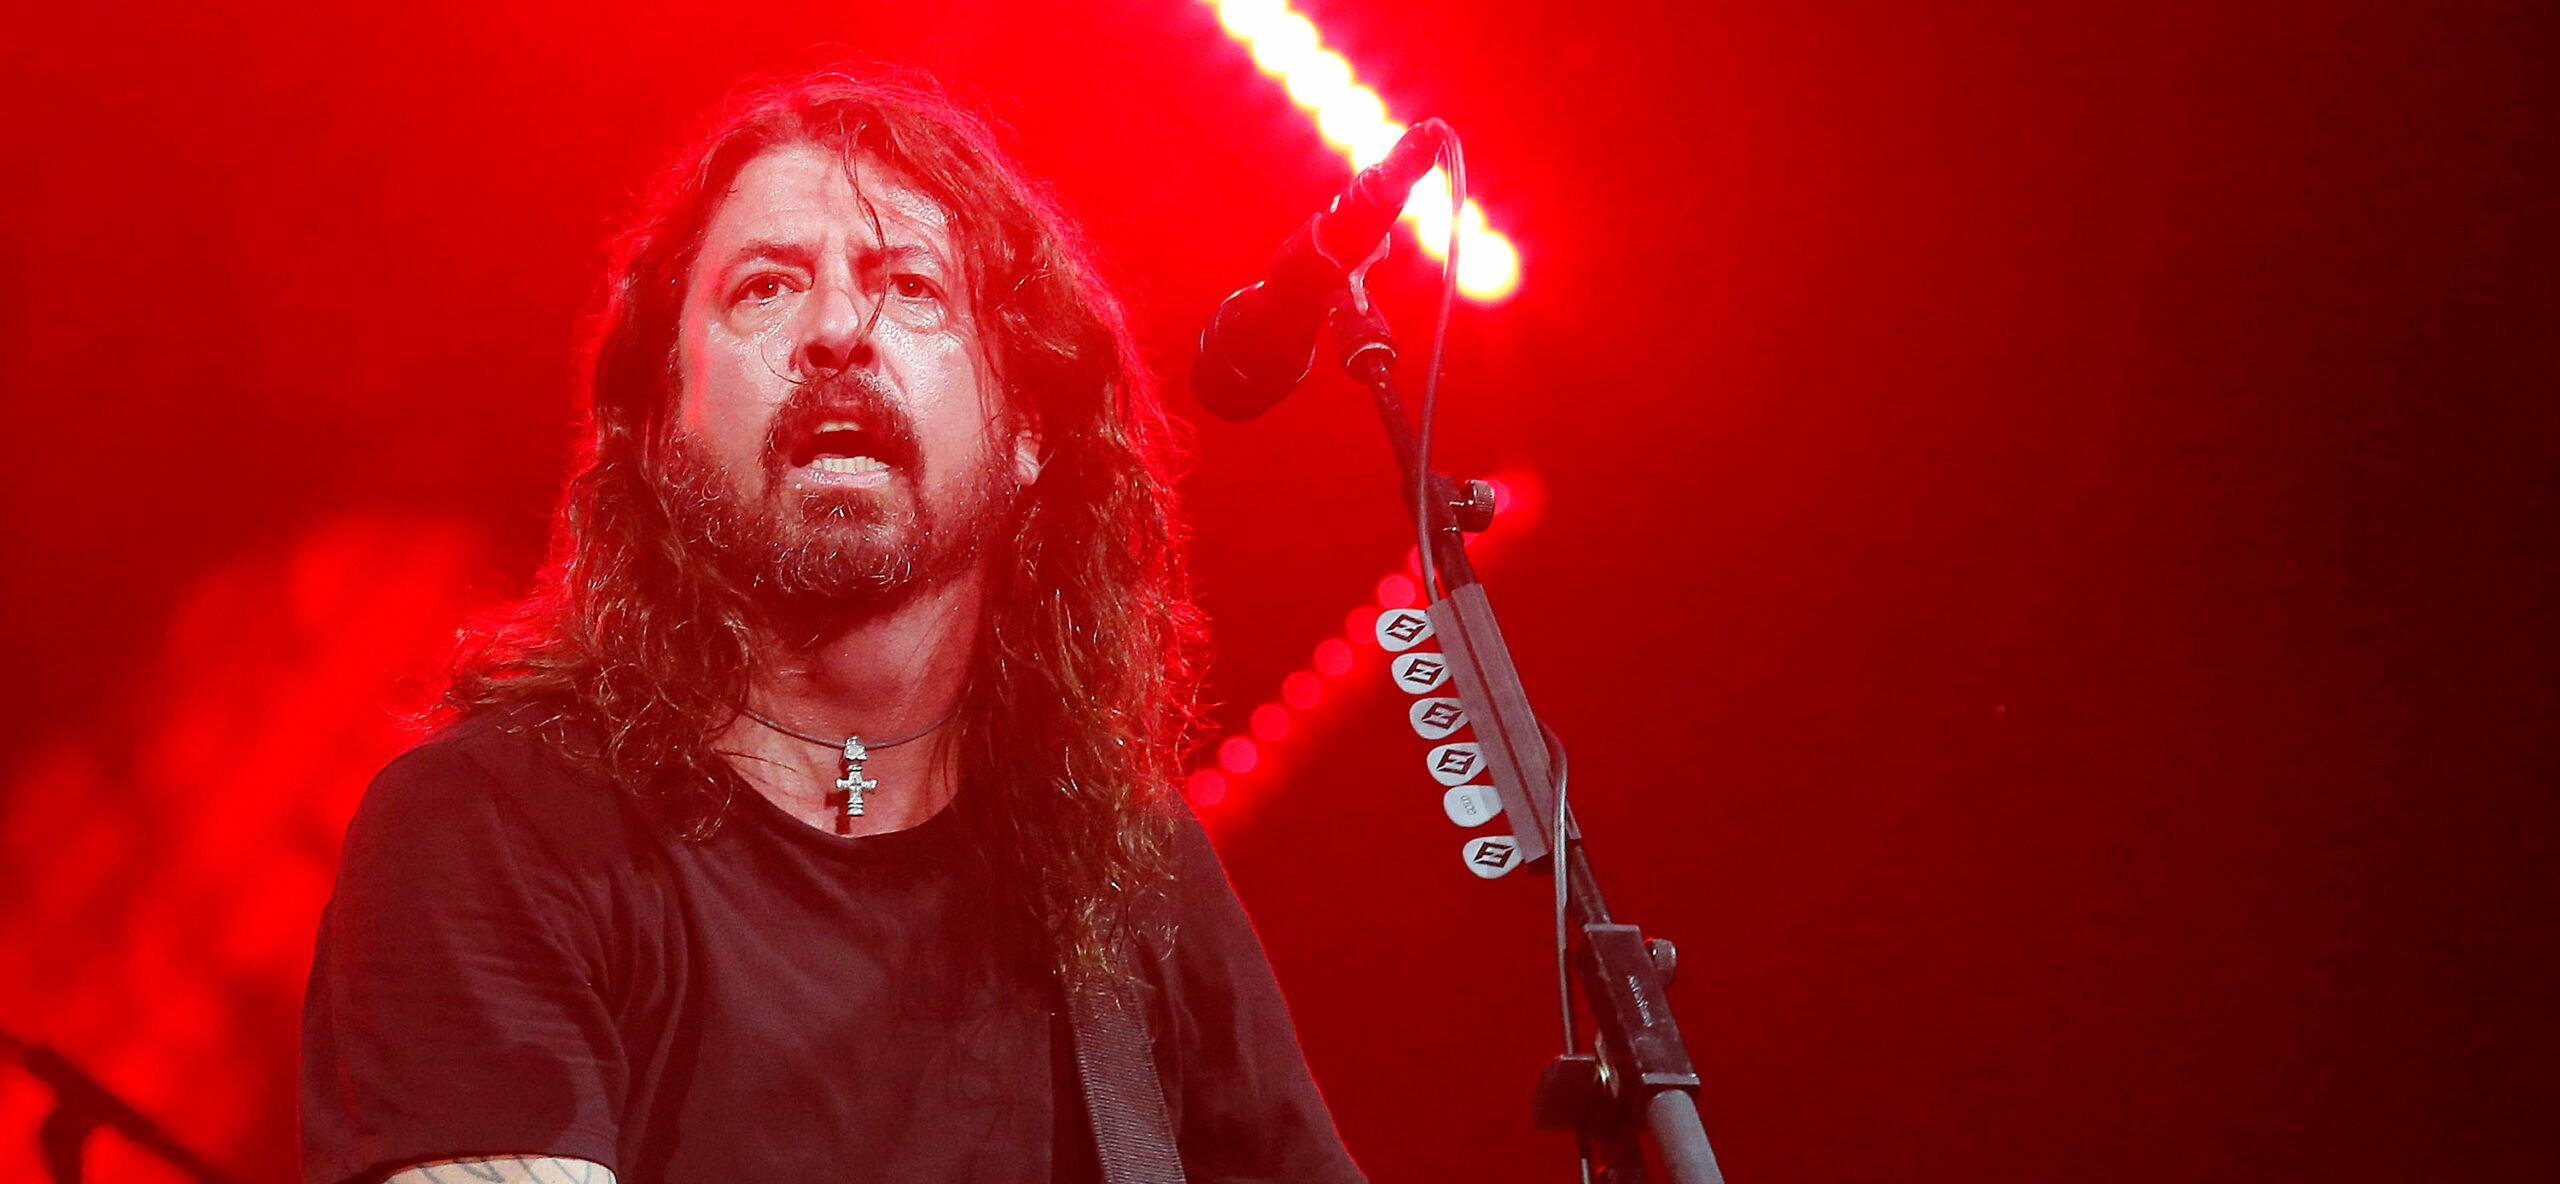 Dave Grohl Teases ‘Studio 666’: It’s A ‘Rock’n’Roll Movie’ With ‘A Few Dumb Scares’